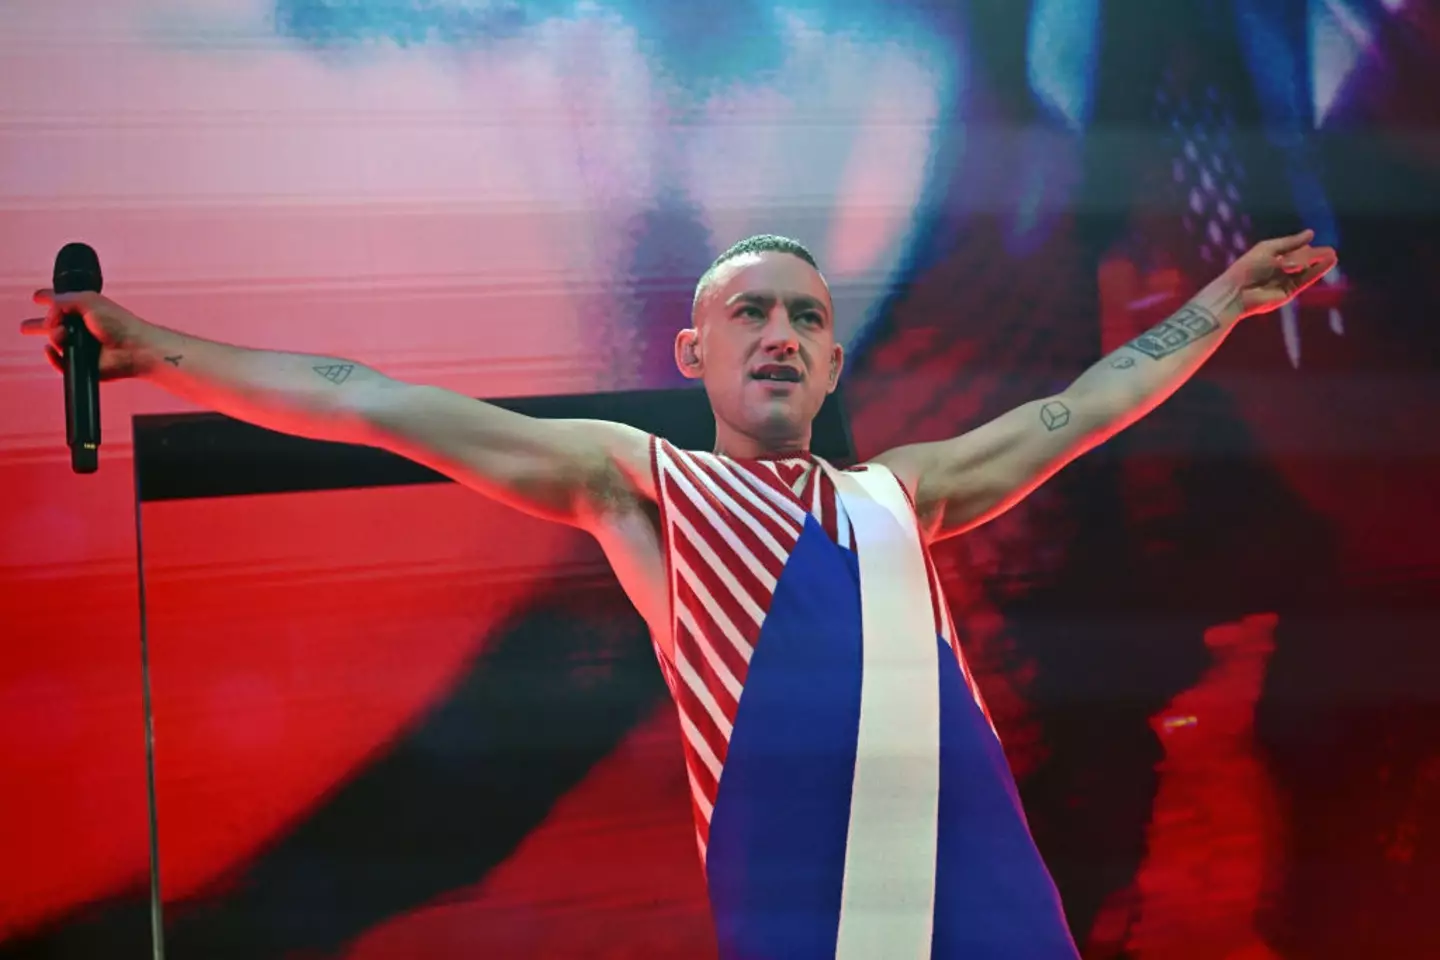 Olly is representing the UK at the Eurovision Song Contest (Jeff Spicer/Getty Images)